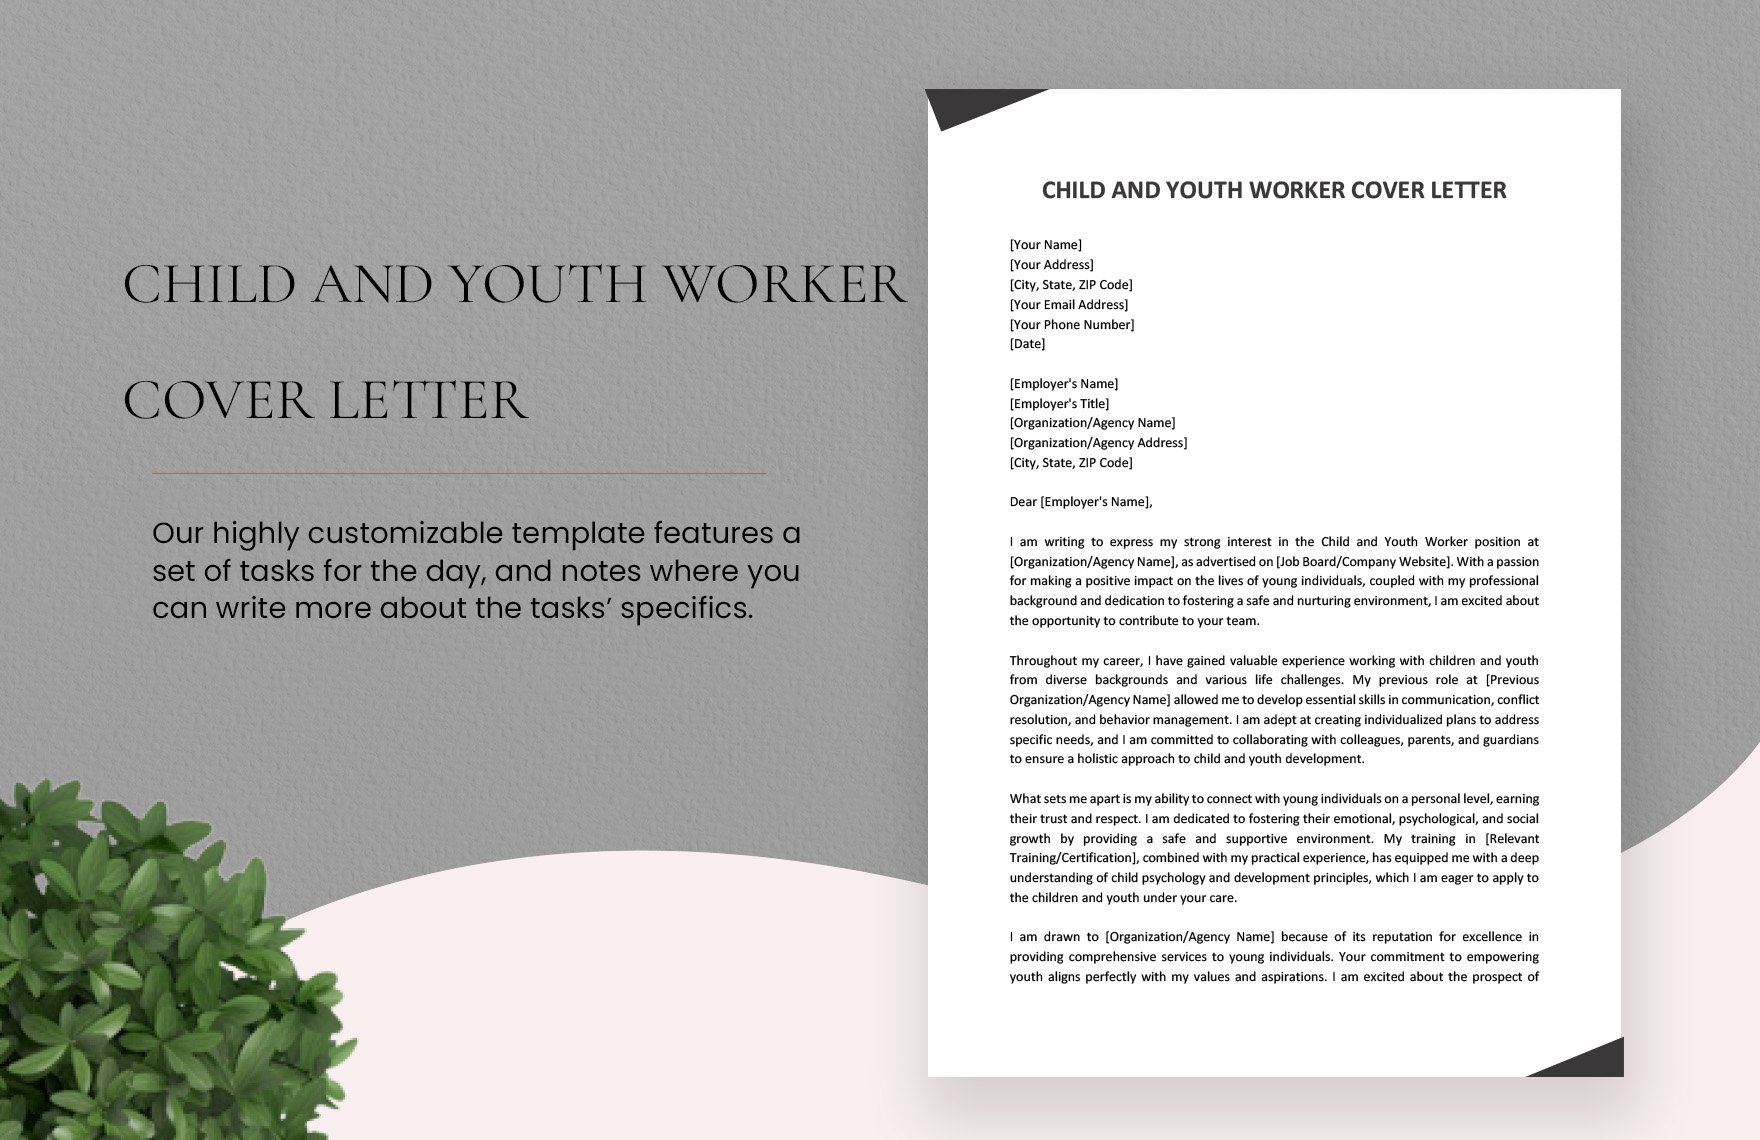 Child And Youth Worker Cover Letter in Word, Google Docs, PDF